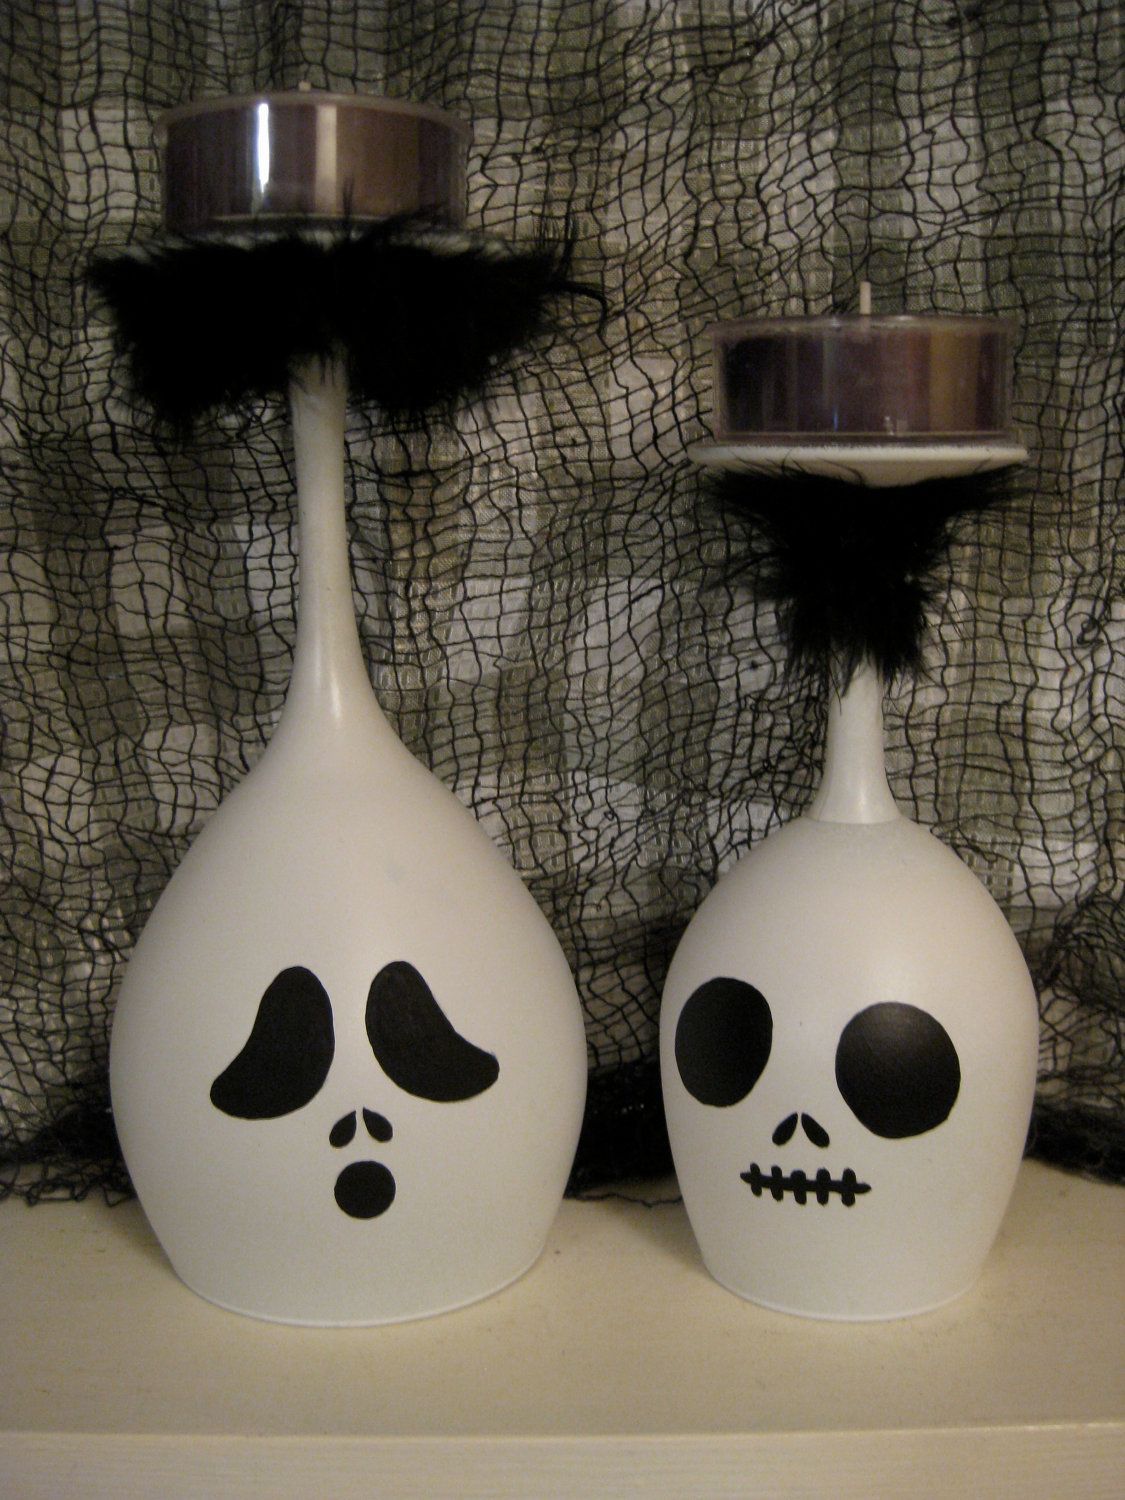 Make them yourself candle holders.. white and black paint (able to hold on to gl